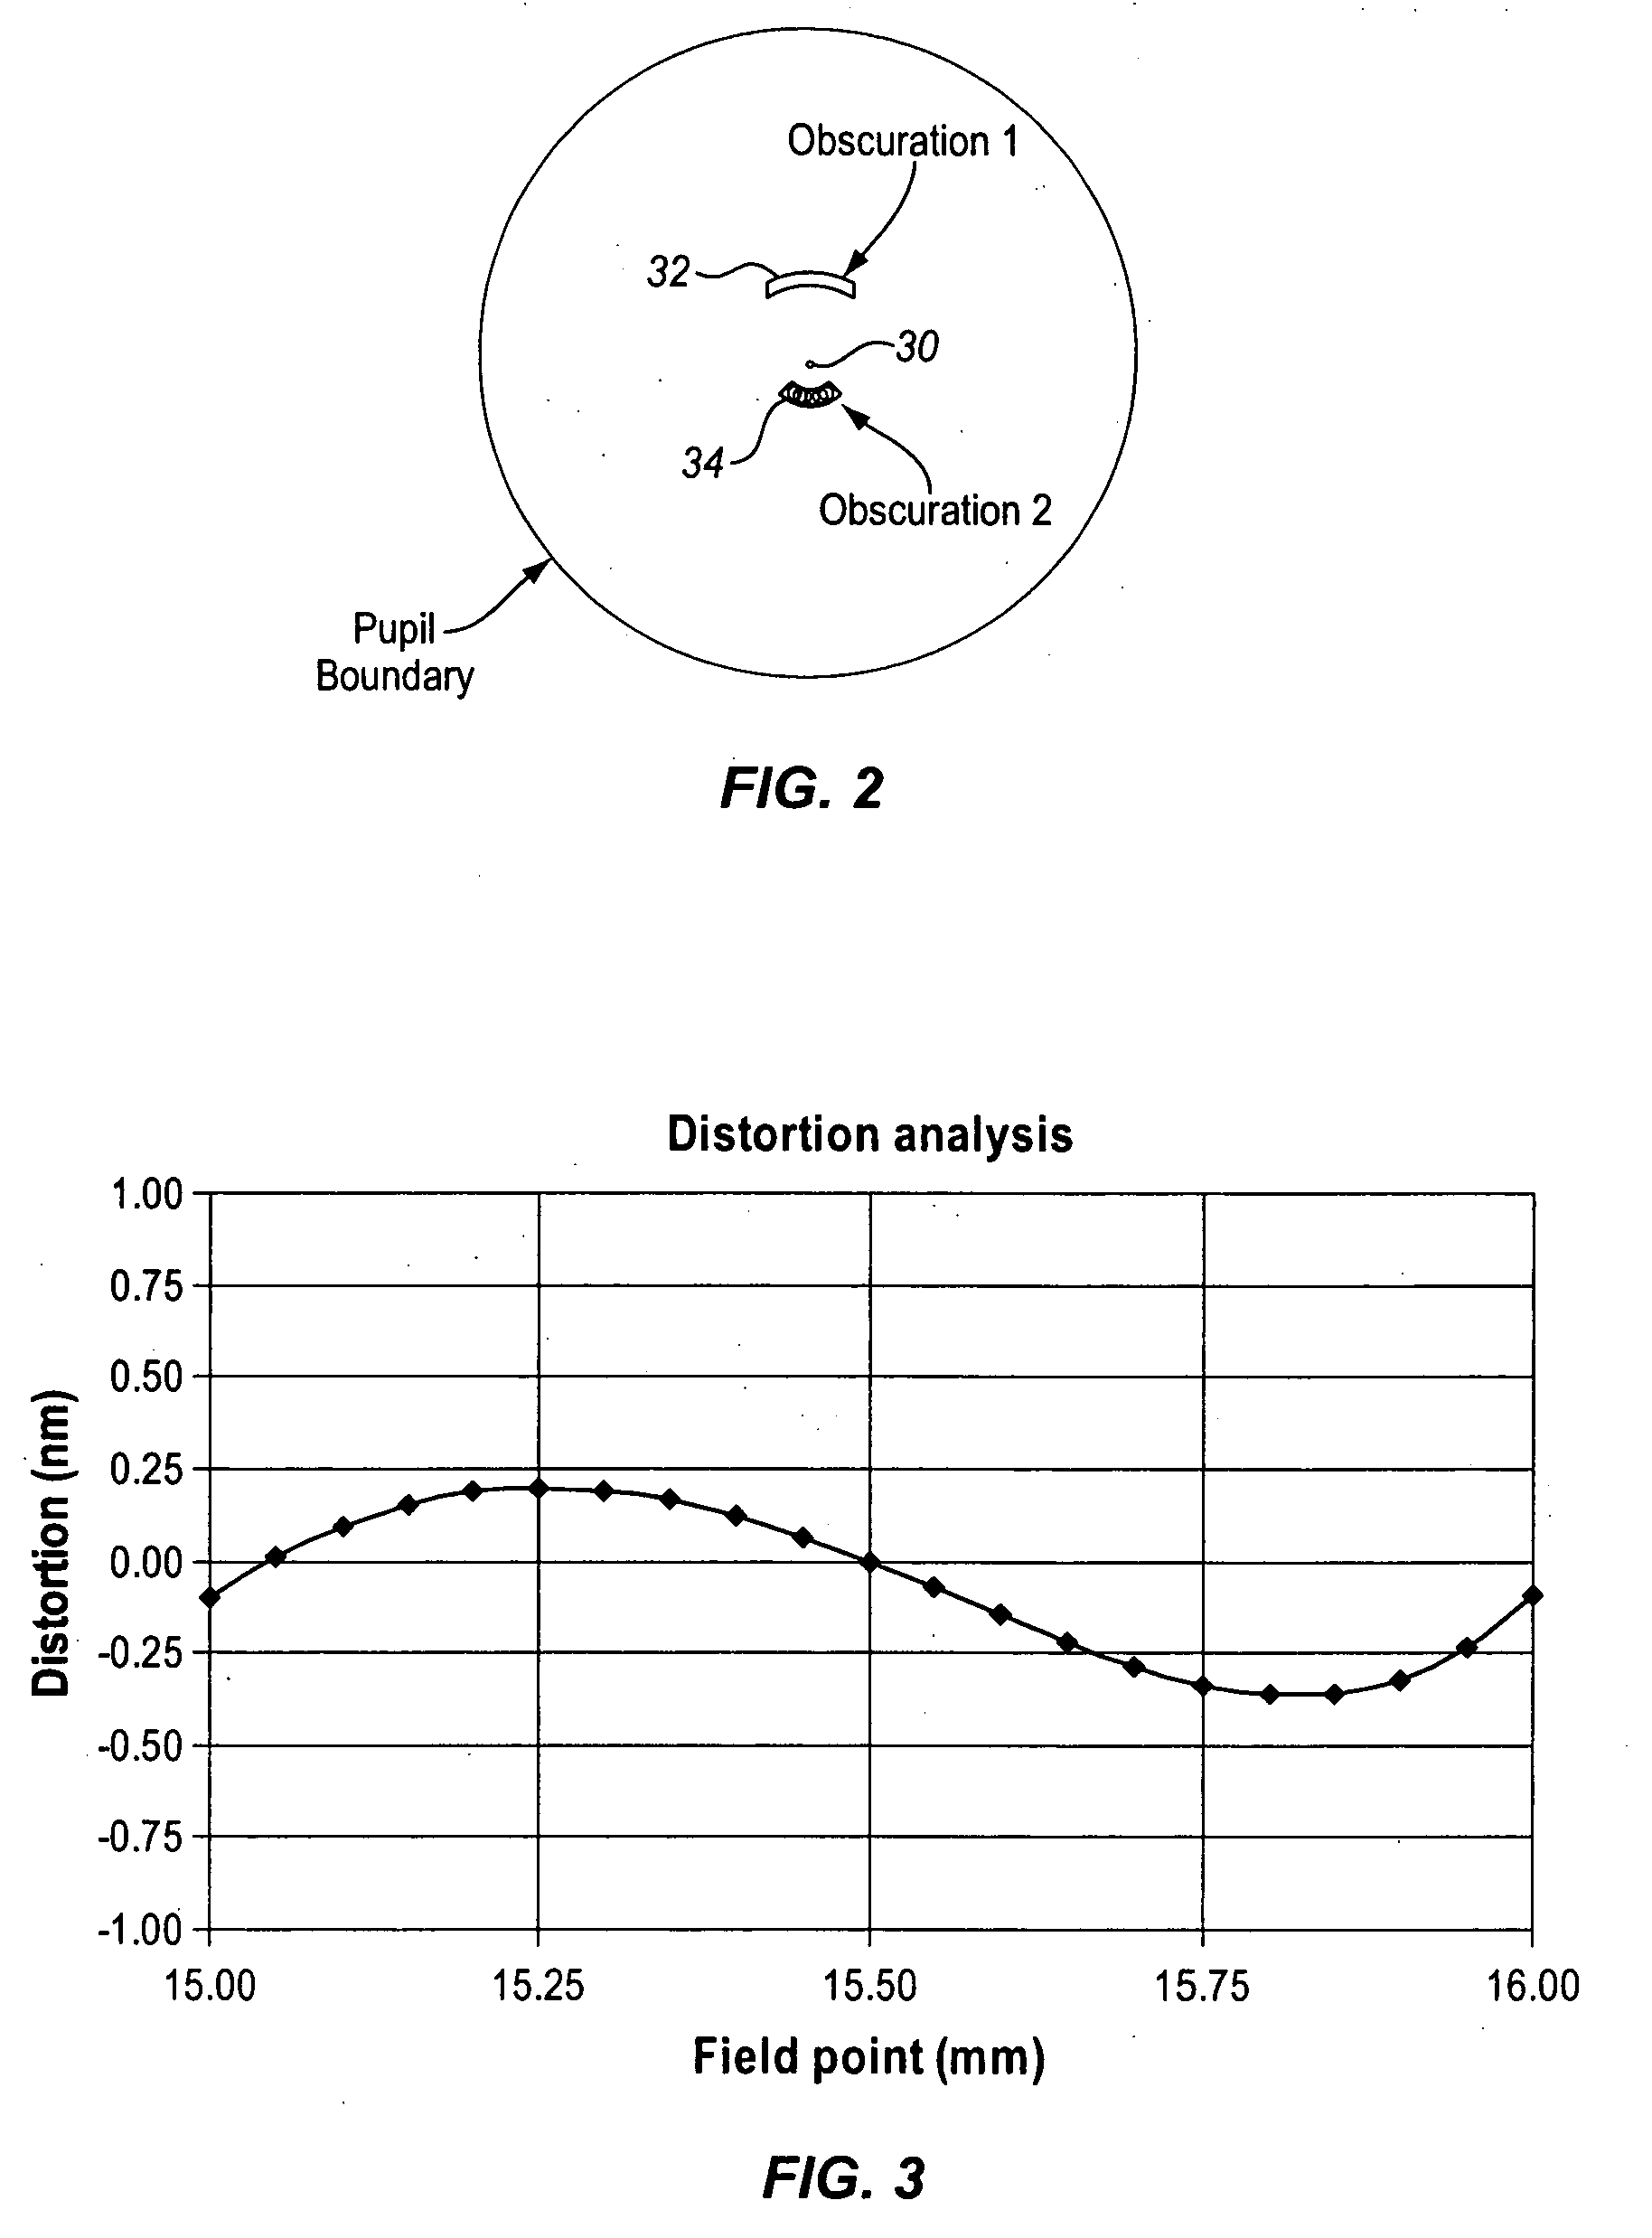 Reflective optical system for a photolithography scanner field projector